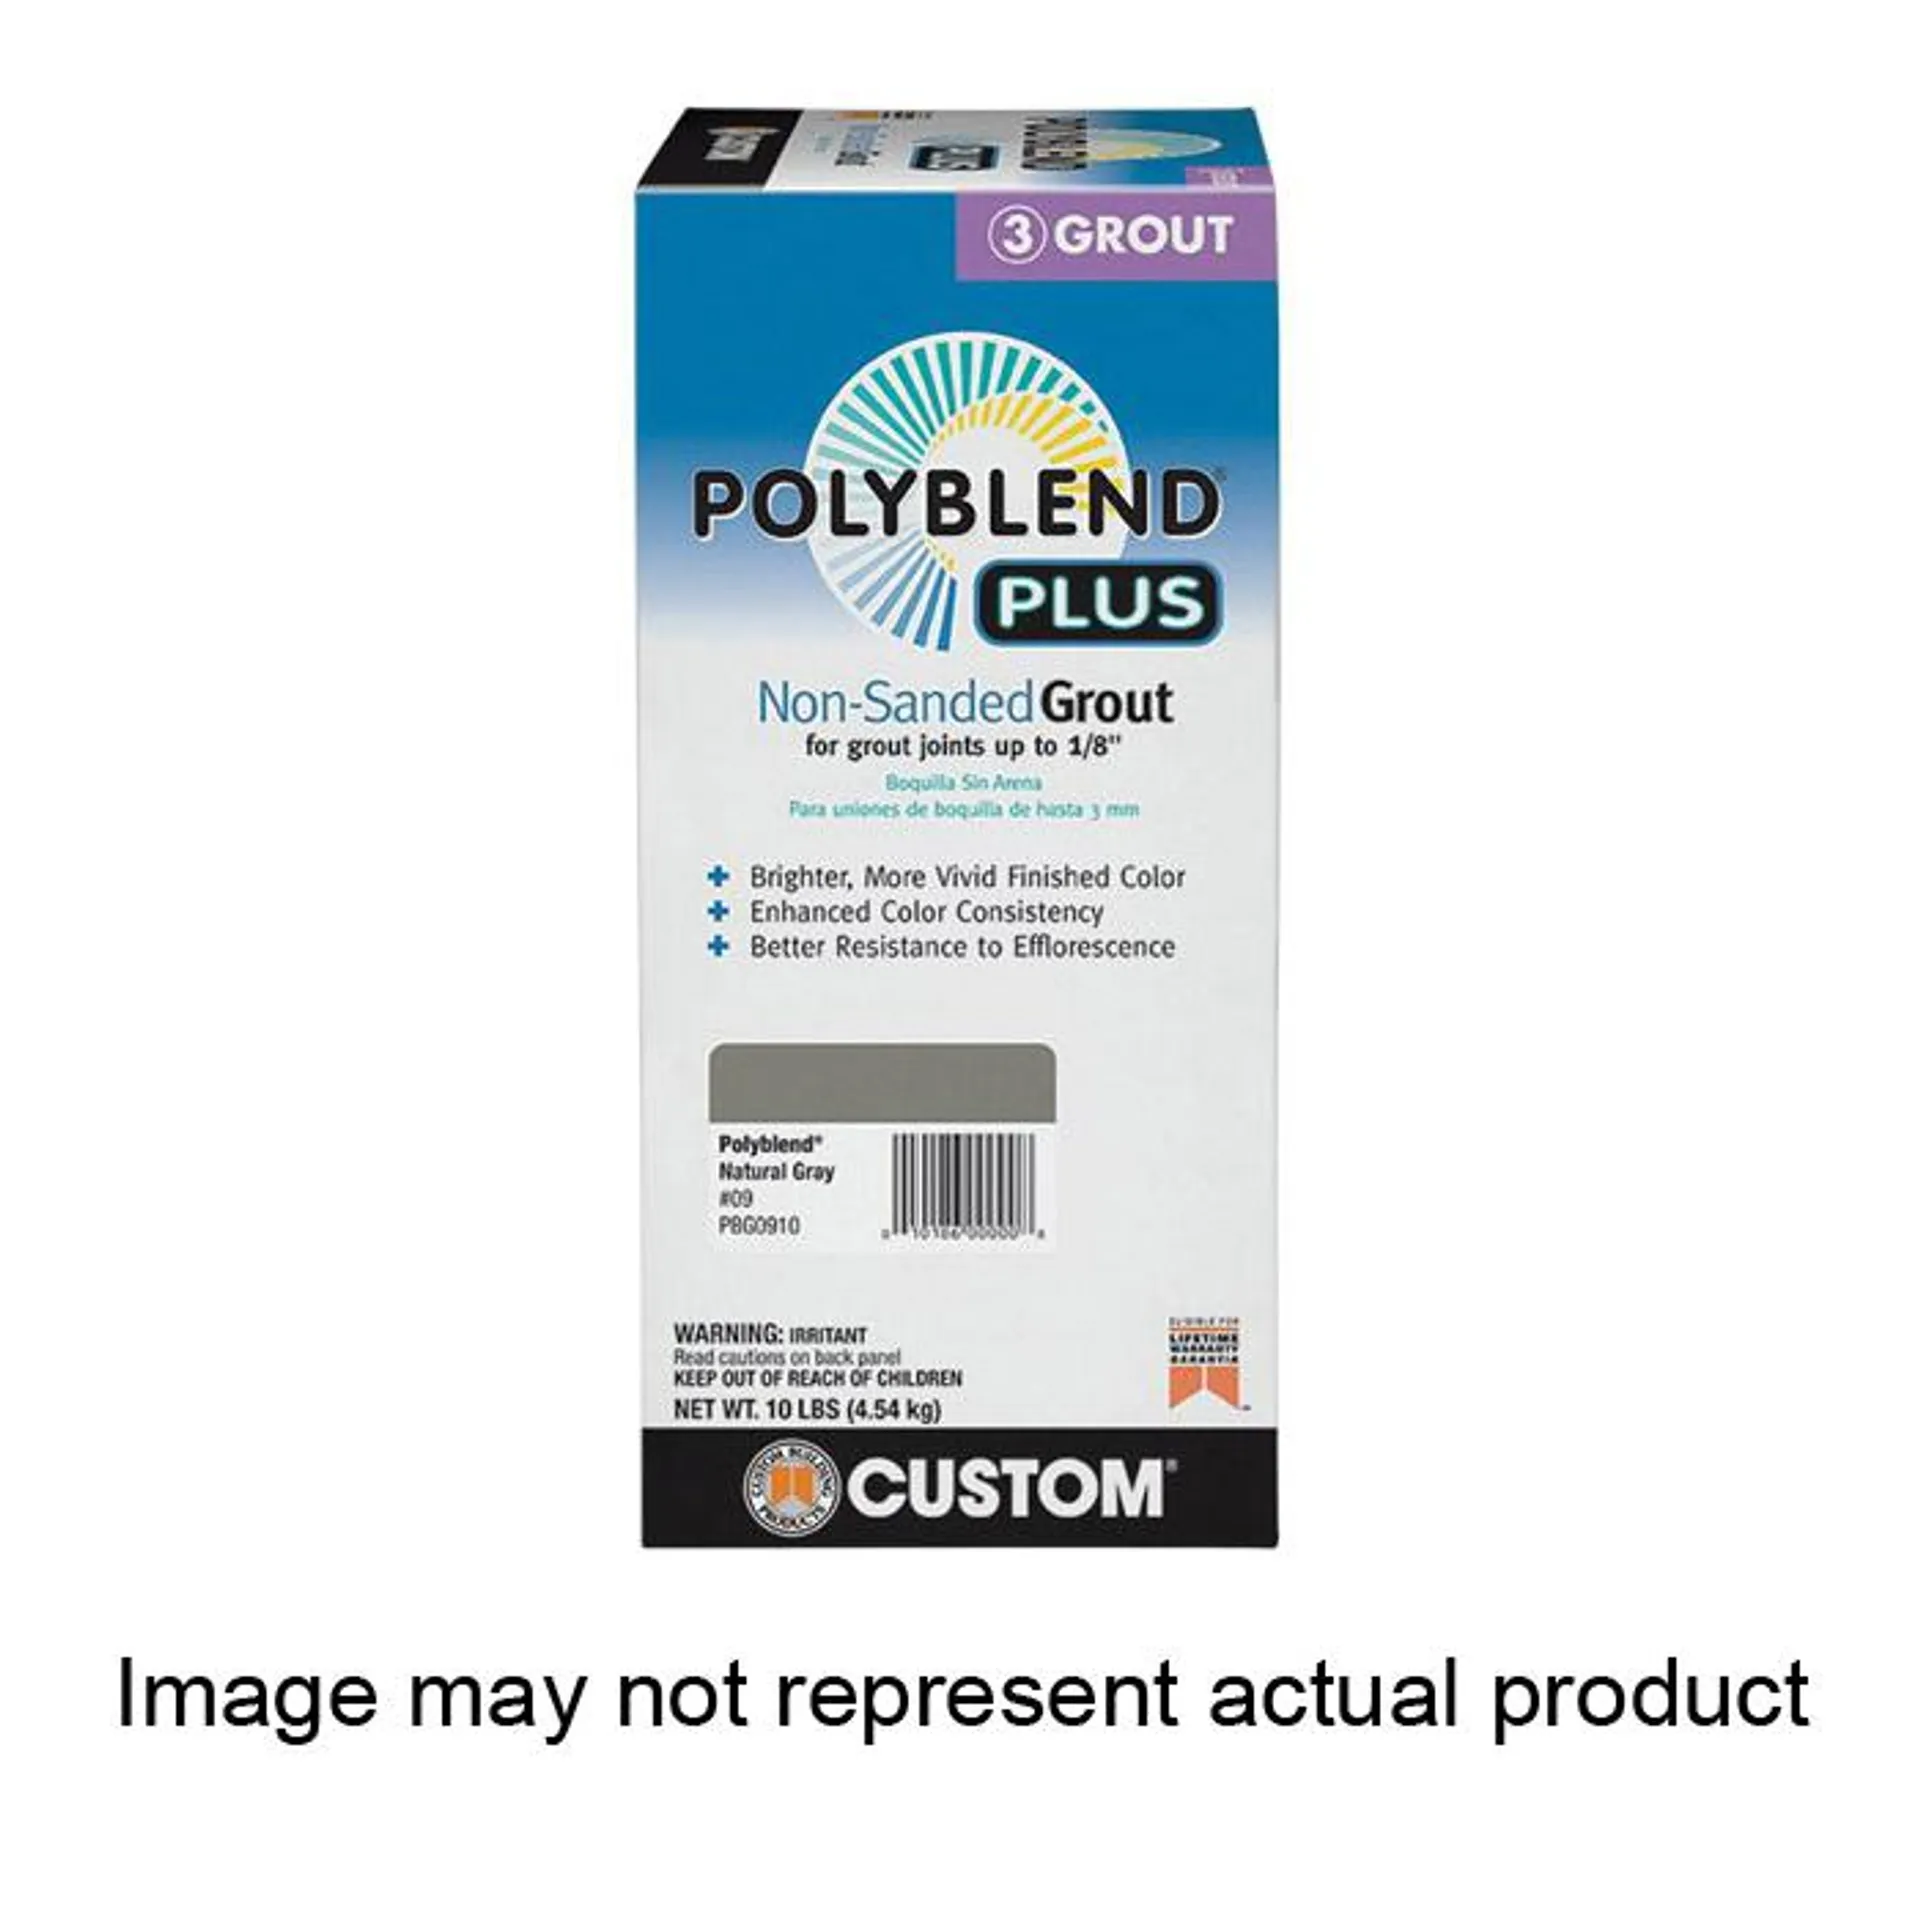 Polyblend PBPG11510 Non-Sanded Grout, Solid Powder, Characteristic, Platinum, 10 lb Box